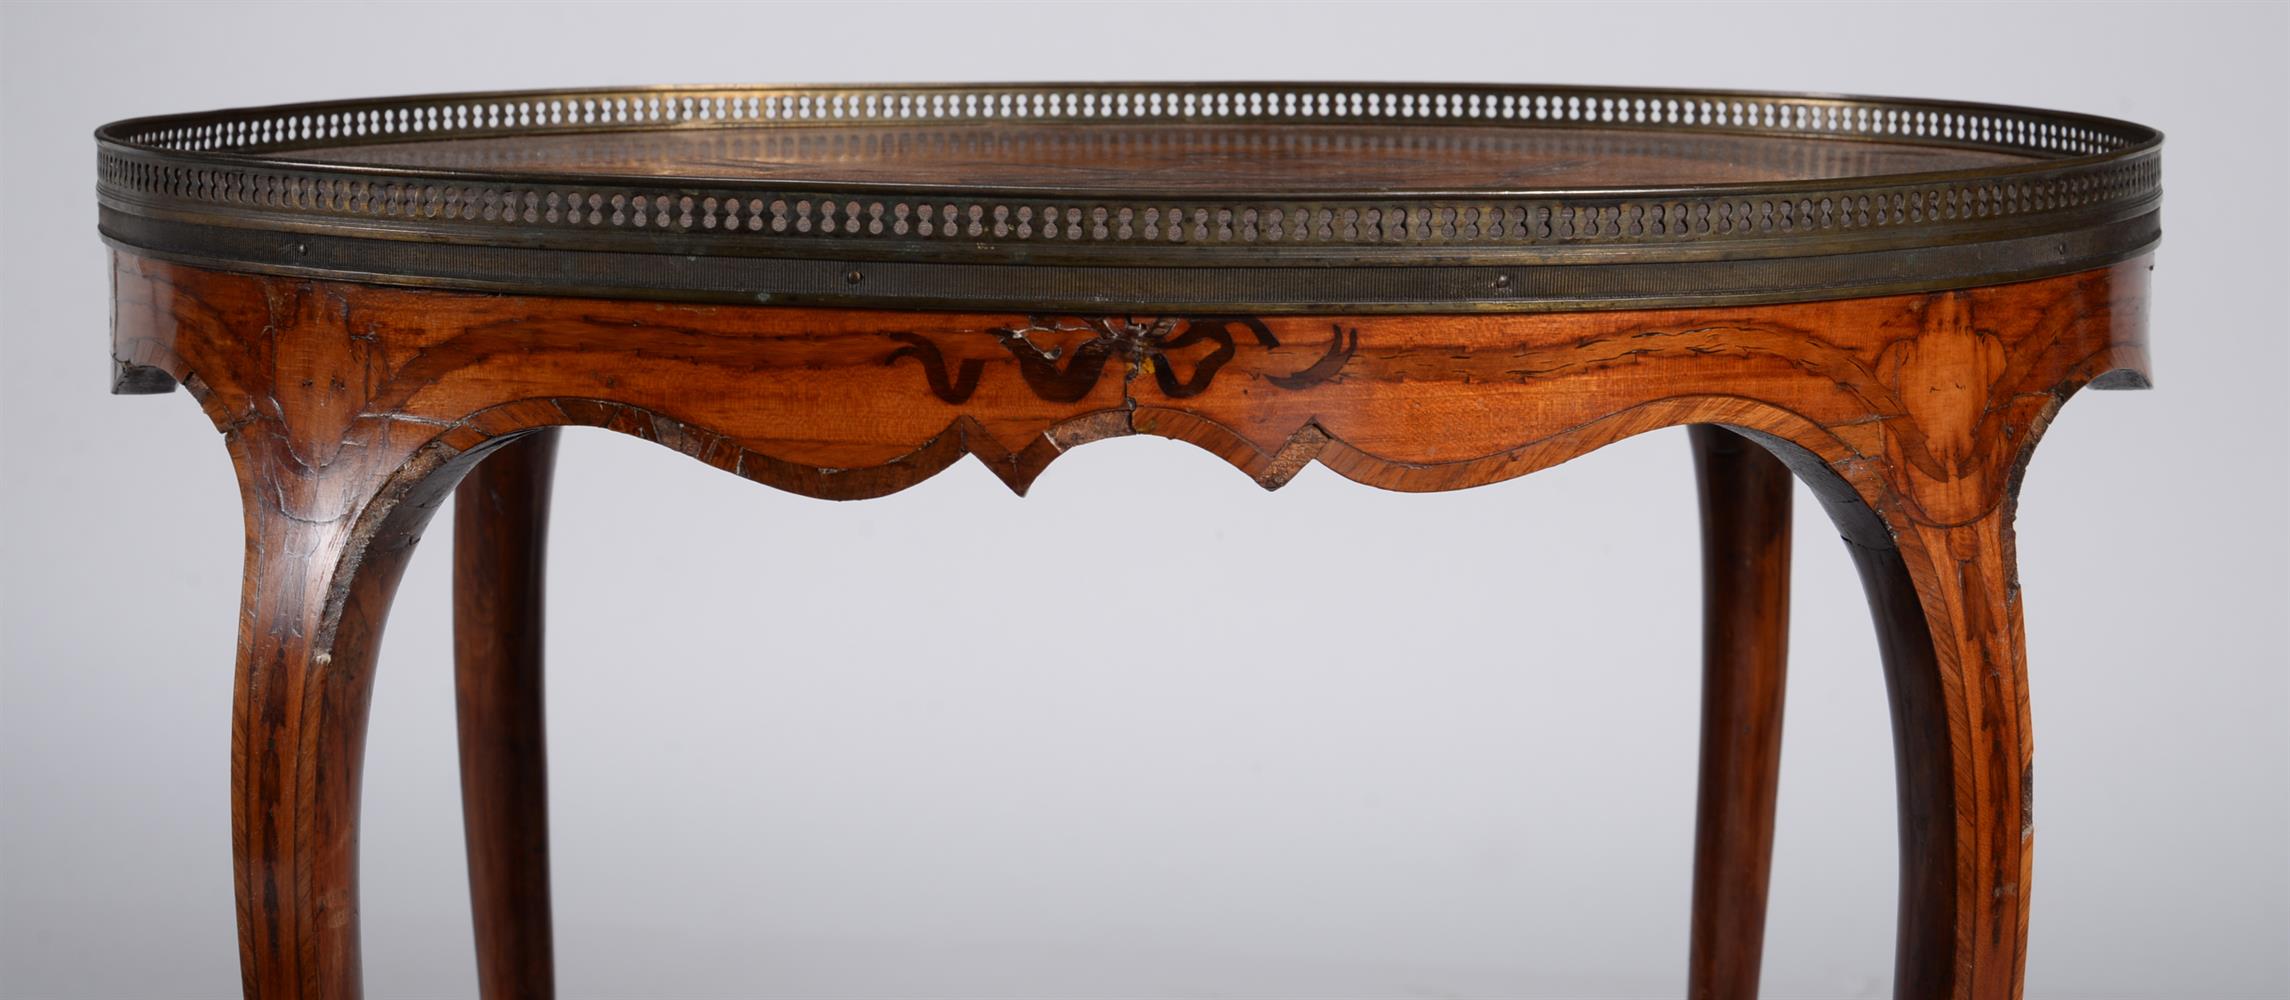 A George III mahogany and marquetry inlaid oval occasional table - Image 2 of 3